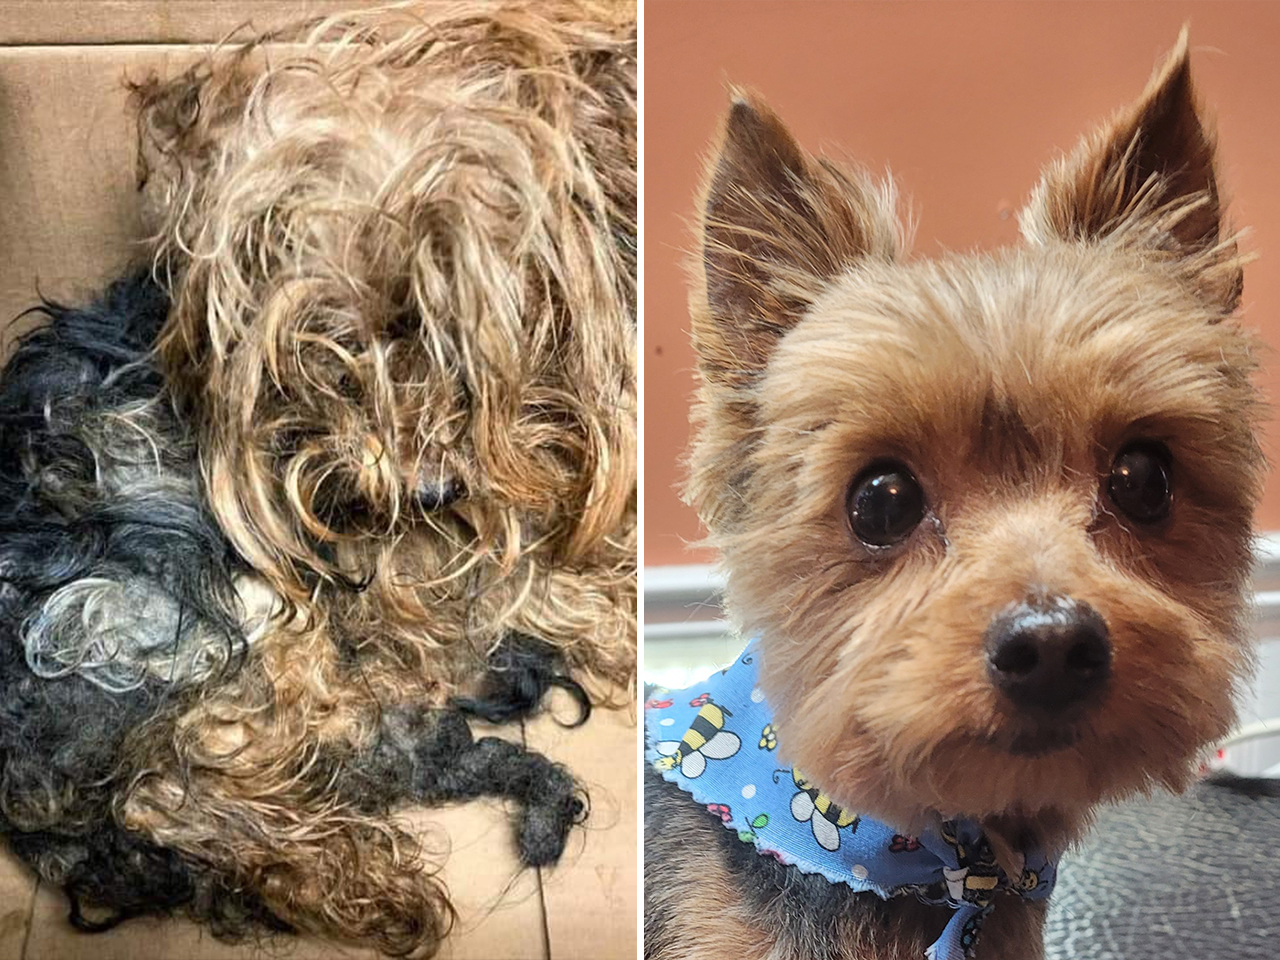 Flynn was found in a box.  It was so tangled that rescuers could barely distinguish its head from its tail.  He also had a broken leg, but luckily he recovered and was adopted by a shelter volunteer.